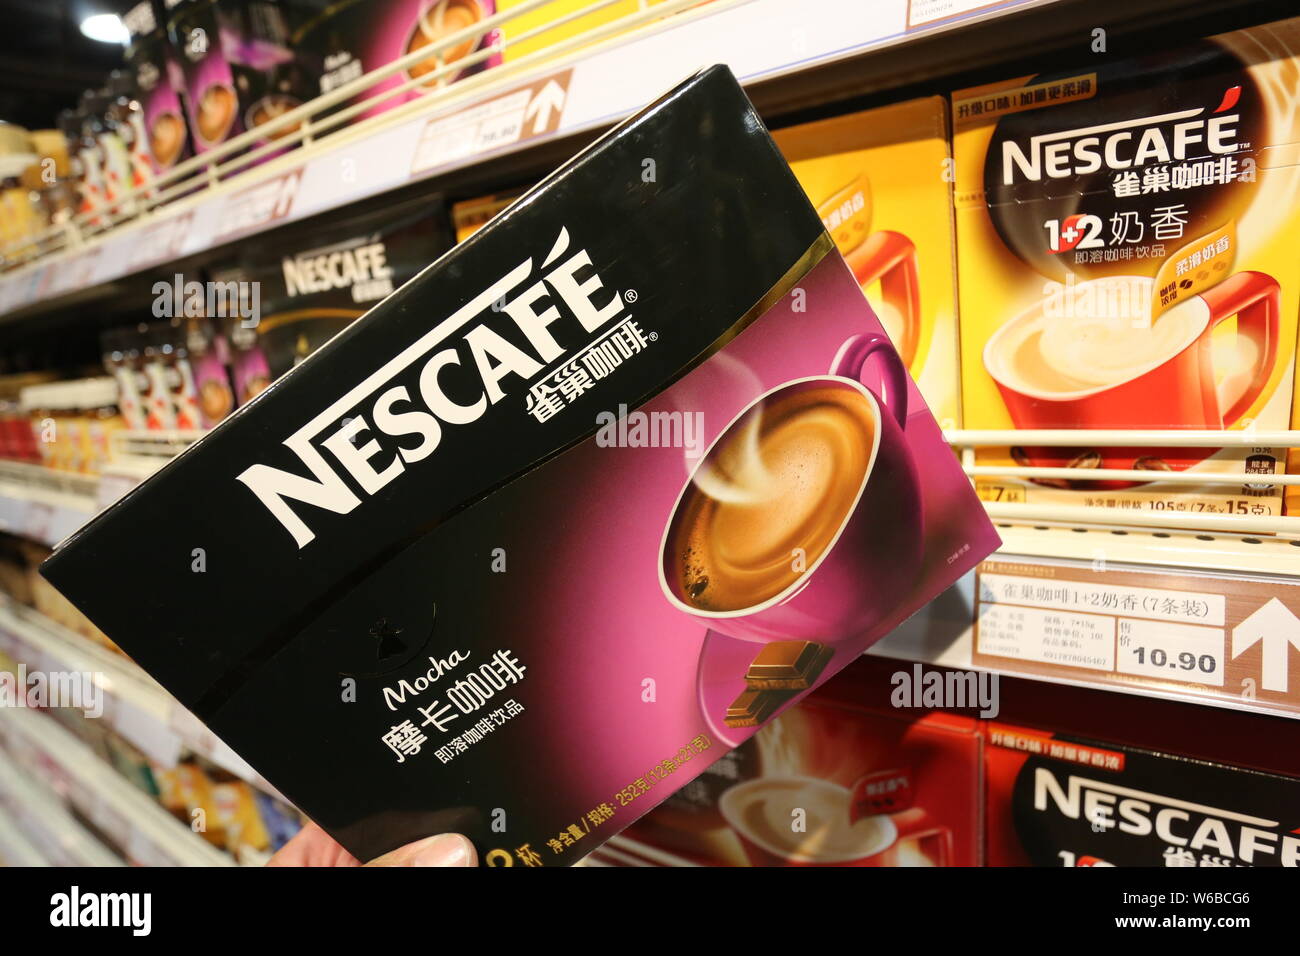 --FILE--A customer shops for a carton of Nescafe coffee of Nestle at a supermarket in Xuchang city, central China's Henan province, 16 November 2014. Stock Photo